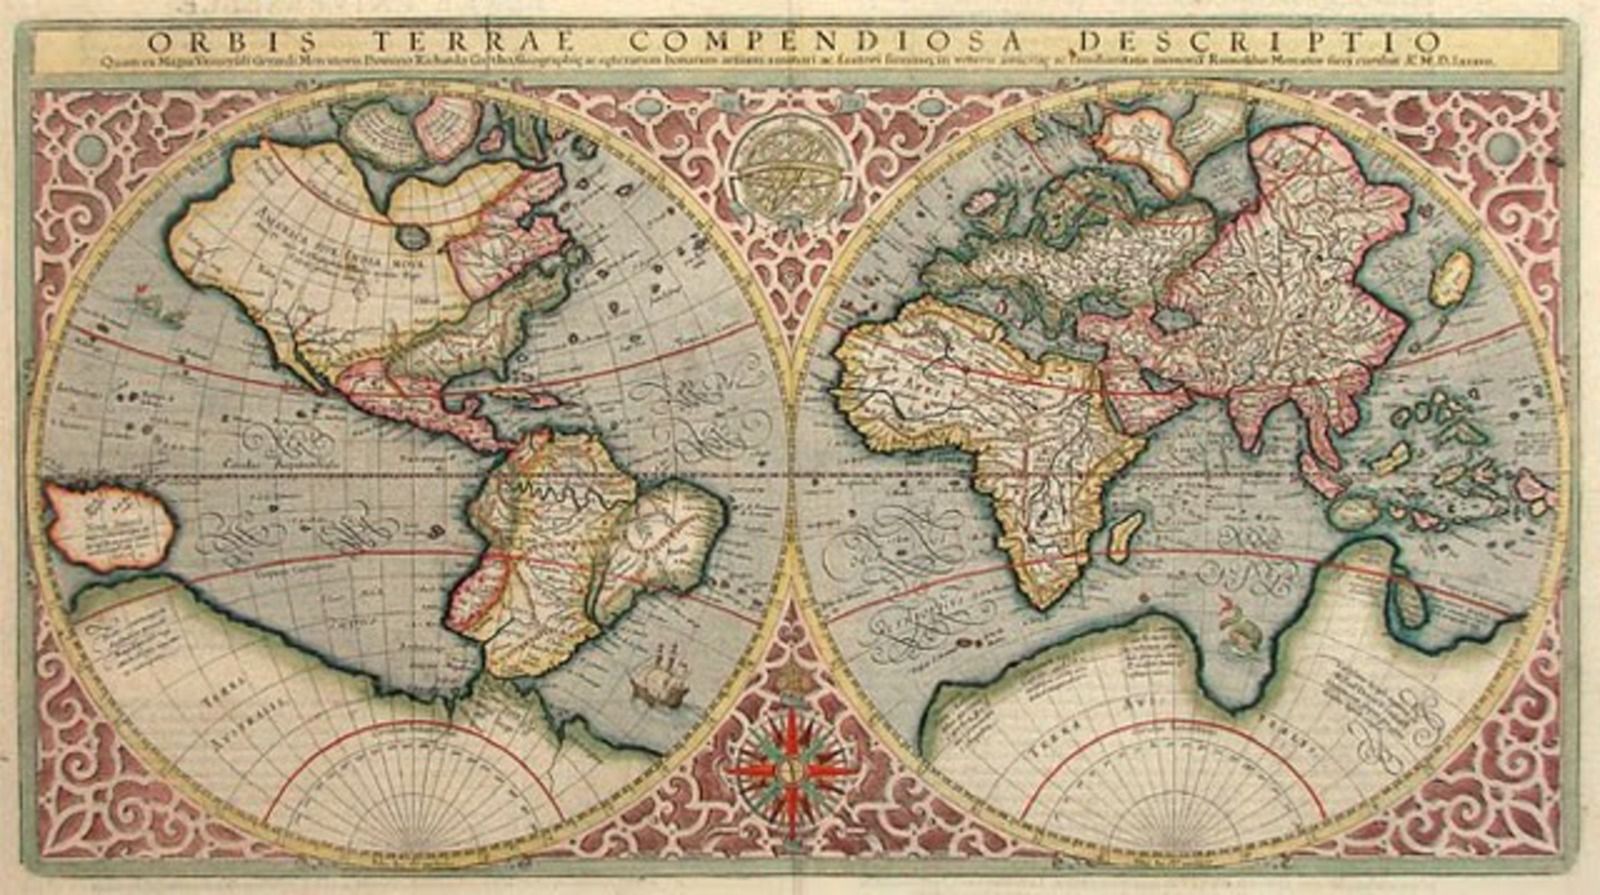 Piri Reis Map - How Could a 16th Century Map Show Antarctica